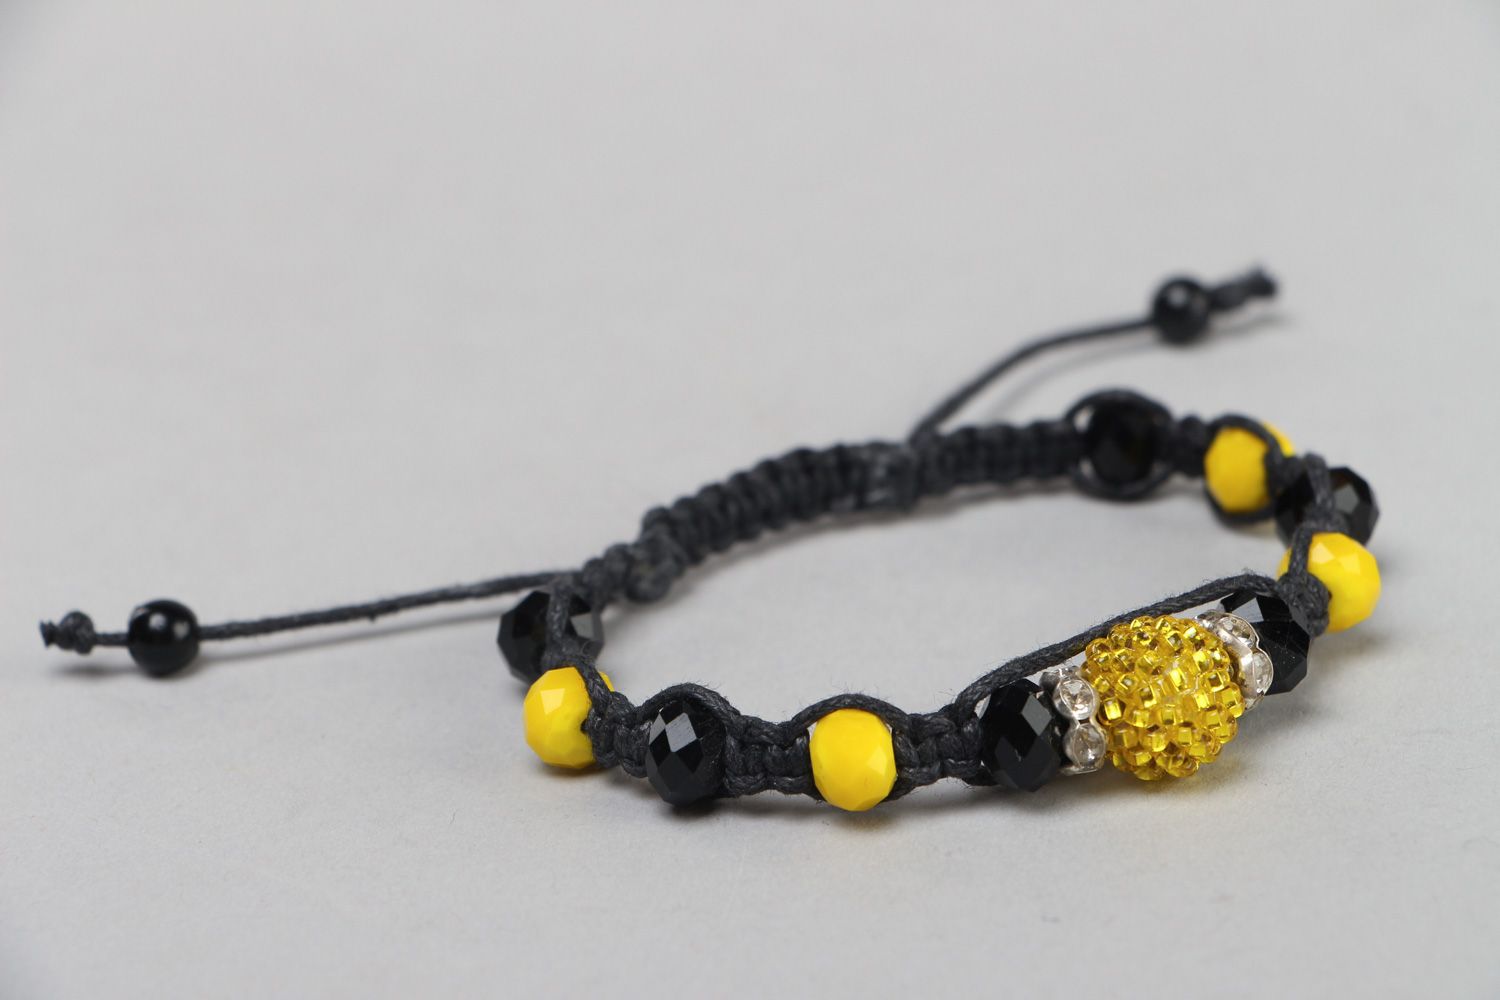 Handmade friendship bracelet woven of black cord and yellow beads for women photo 1